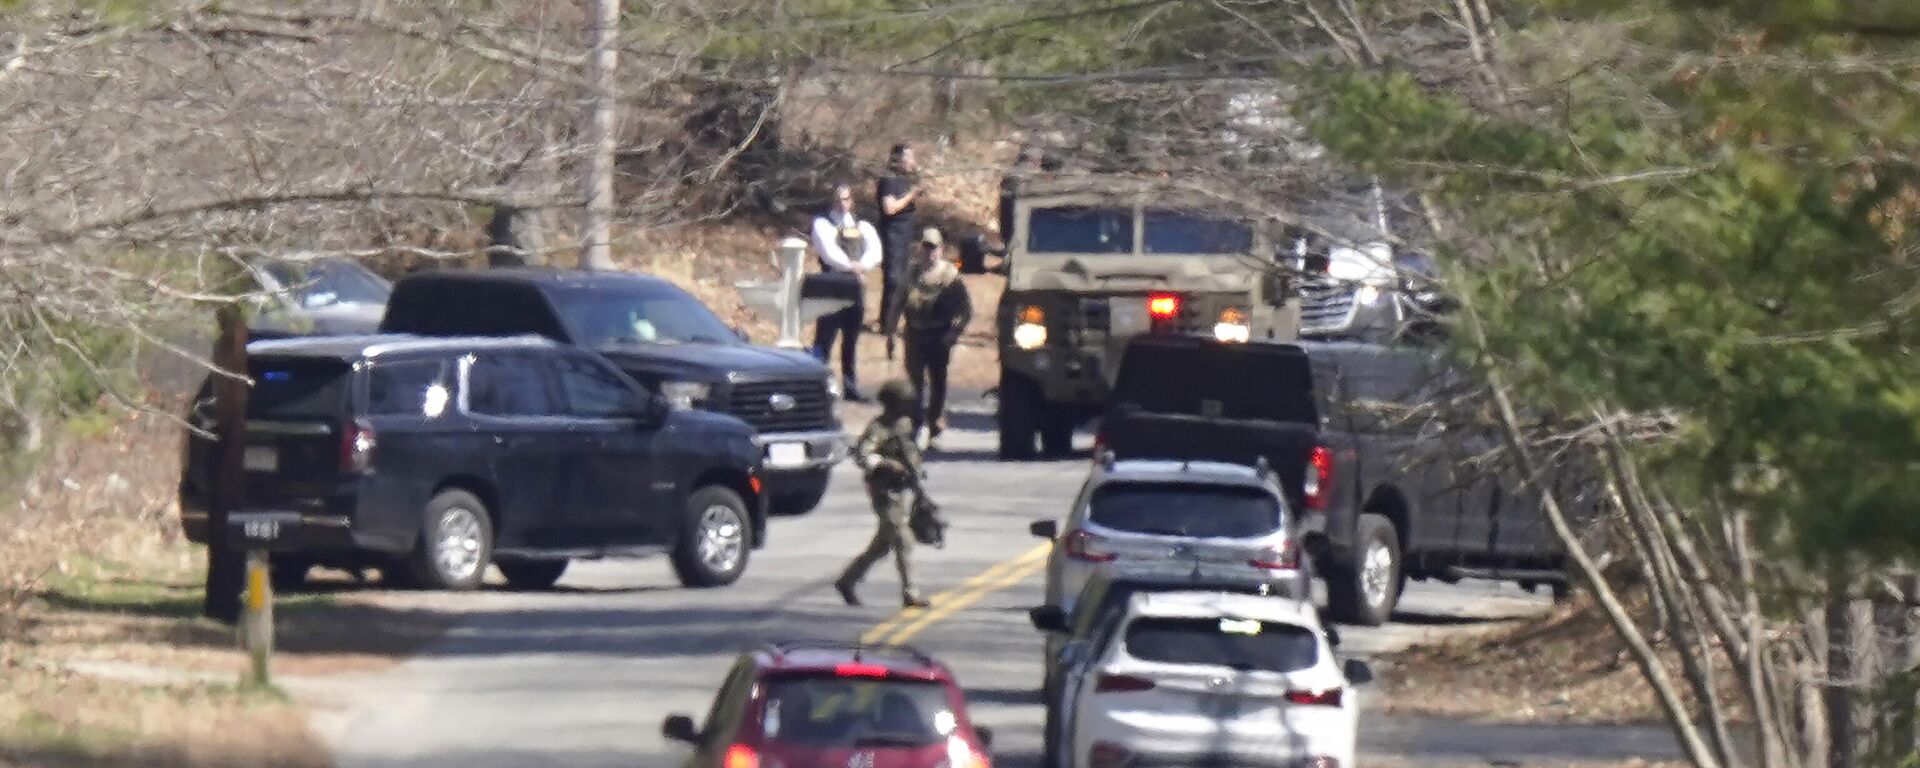 Members of law enforcement assemble on a road, Thursday, April 13, 2023, in Dighton, Mass., near where FBI agents converged on the home of a Massachusetts Air National Guard member who has emerged as a main person of interest in the disclosure of highly classified military documents on the Ukraine. The guardsman was identified as 21-year-old Jack Teixeira. - Sputnik International, 1920, 14.04.2023